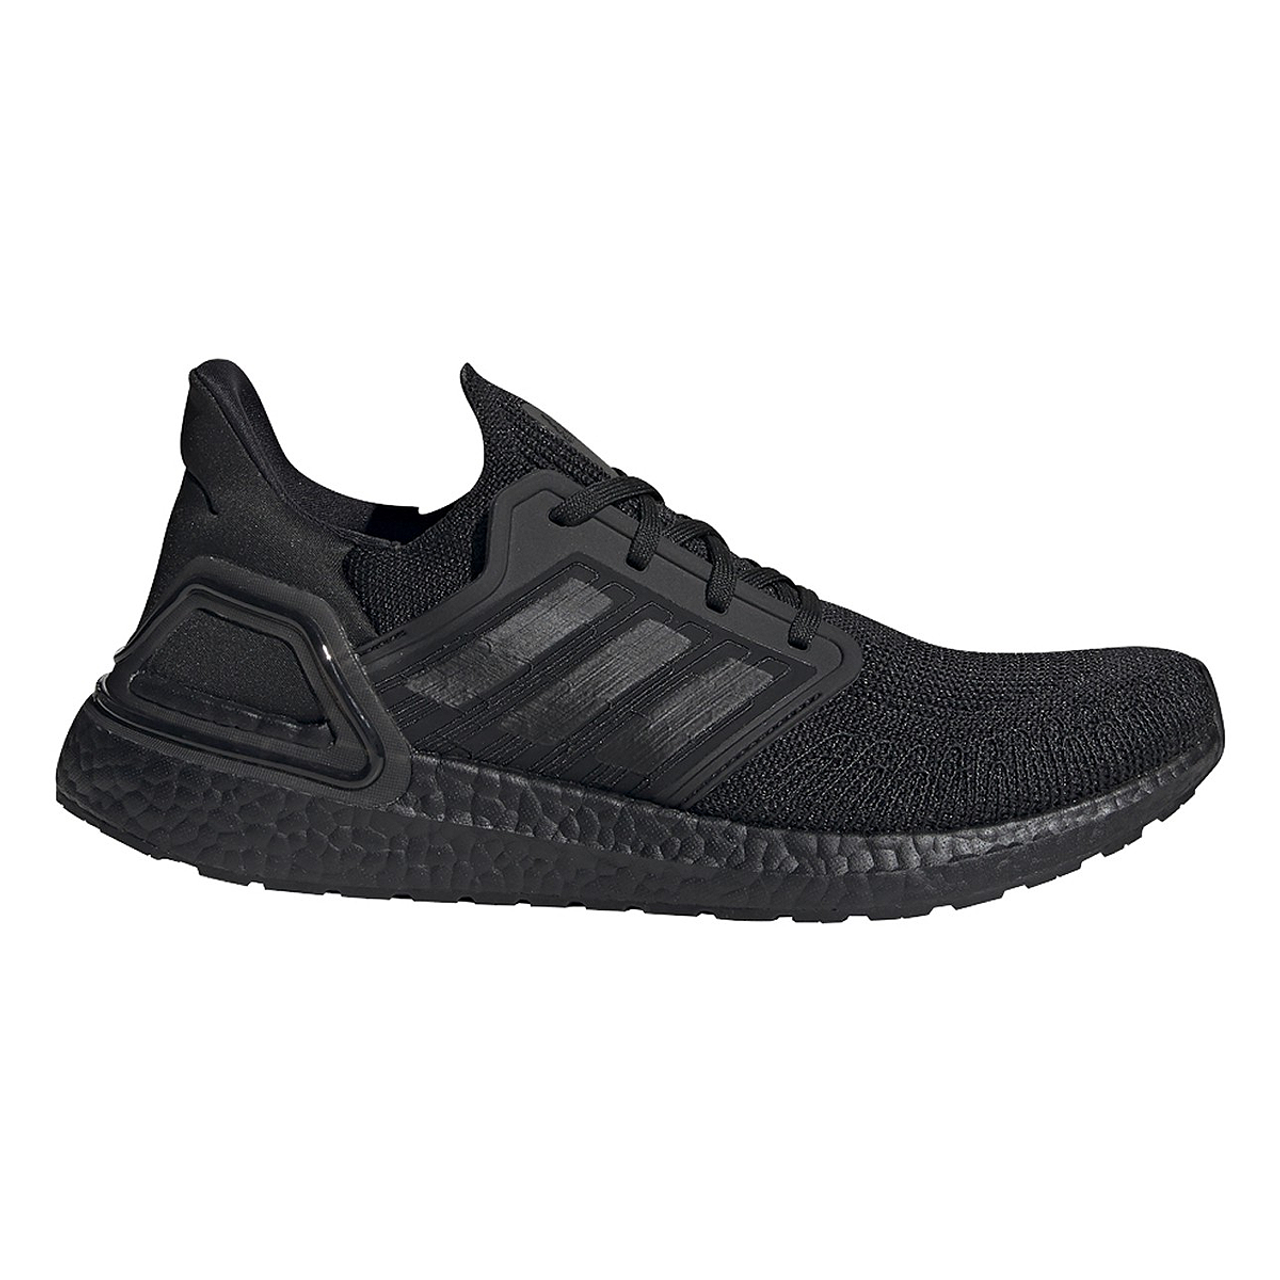 ultraboost 20 shoes solar red